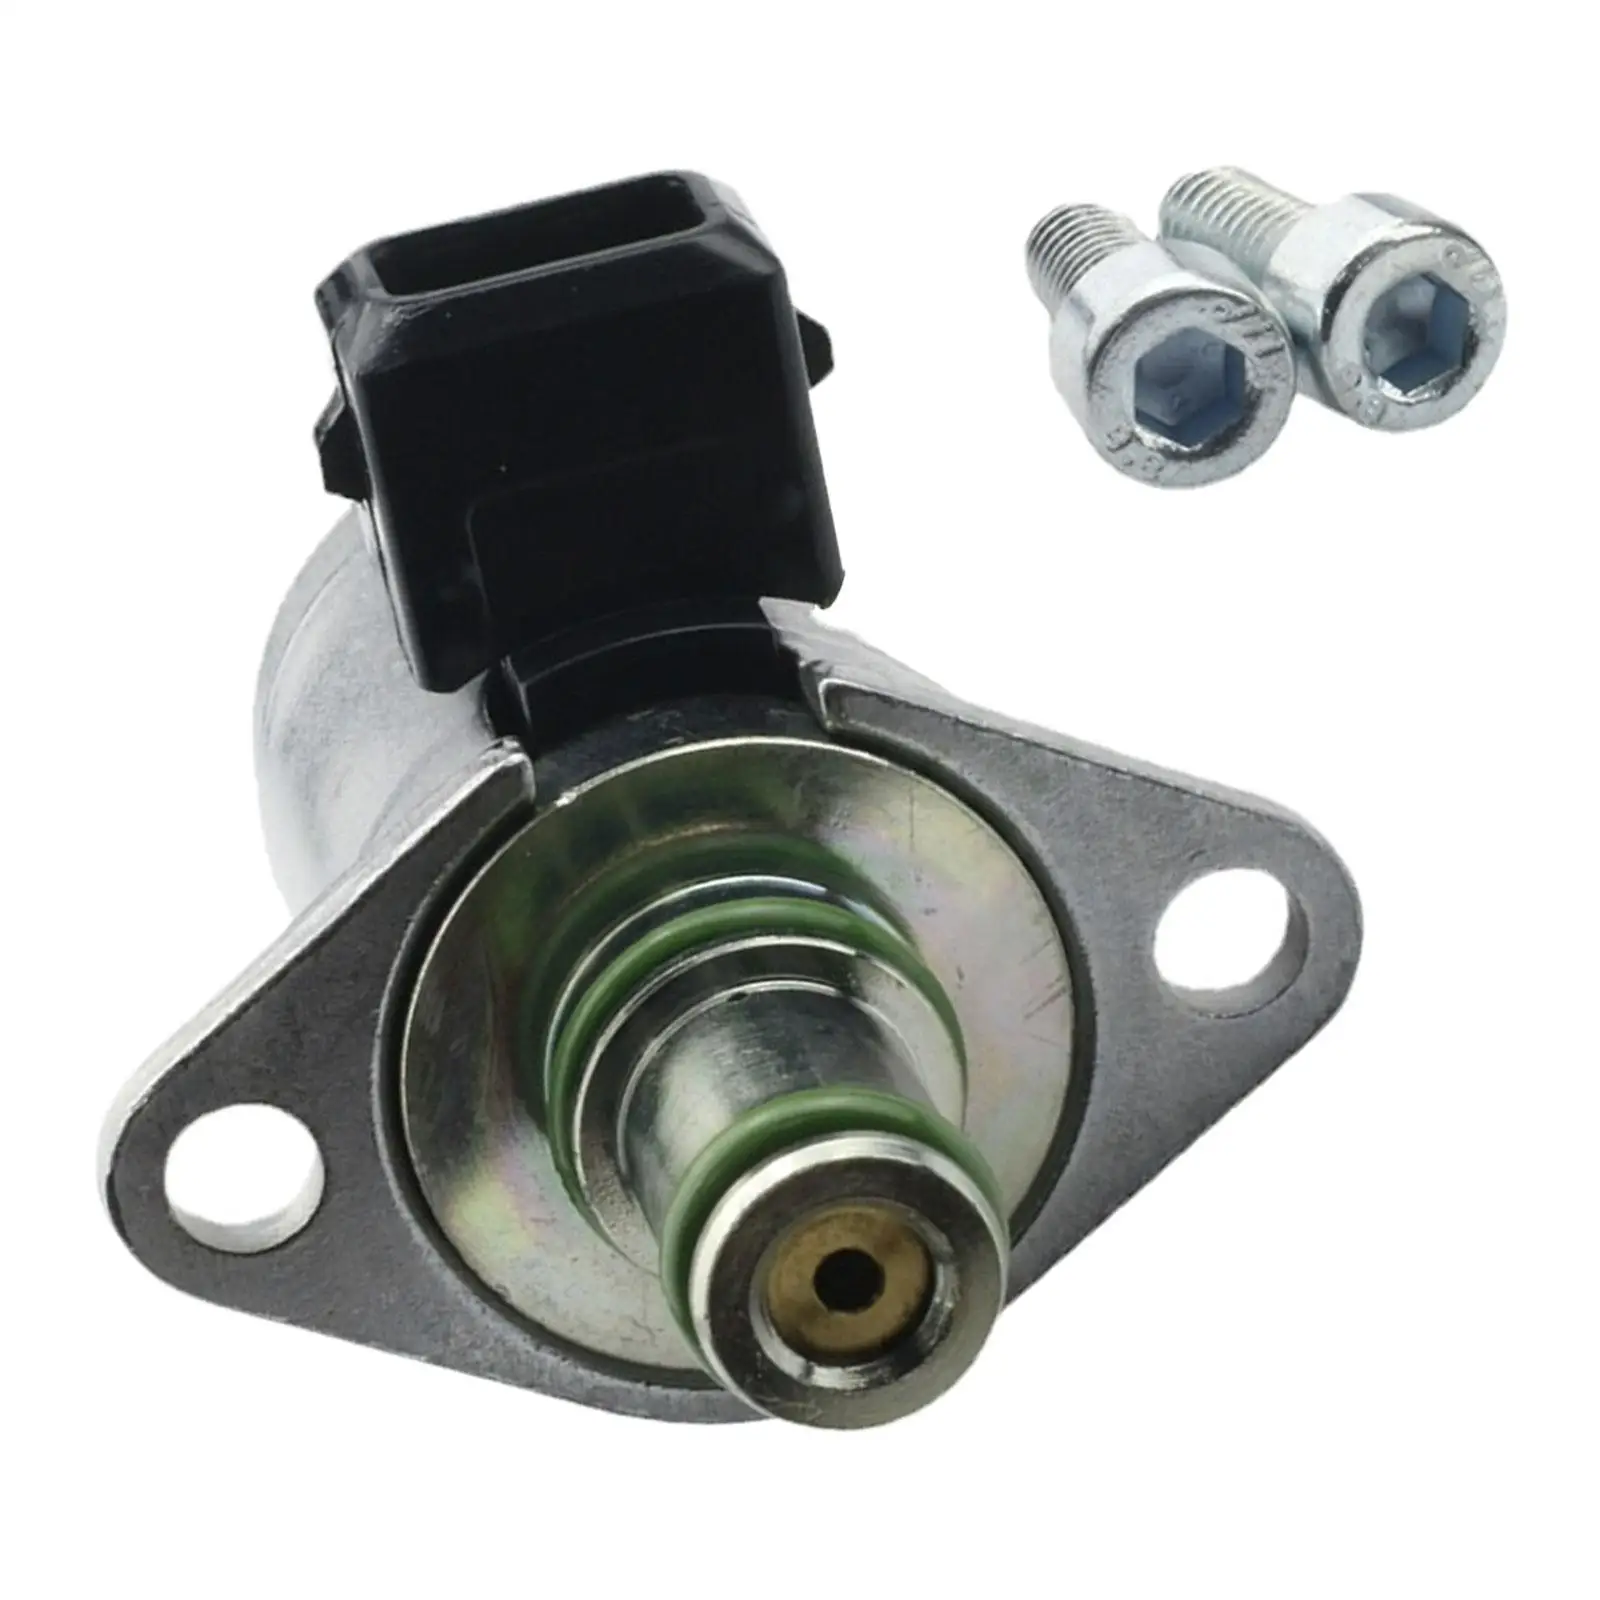 Power Speed Related Steering Proportioning Valve Spare Parts Replaces A2114600984 2114600884 for Mercedes-benz C-klass